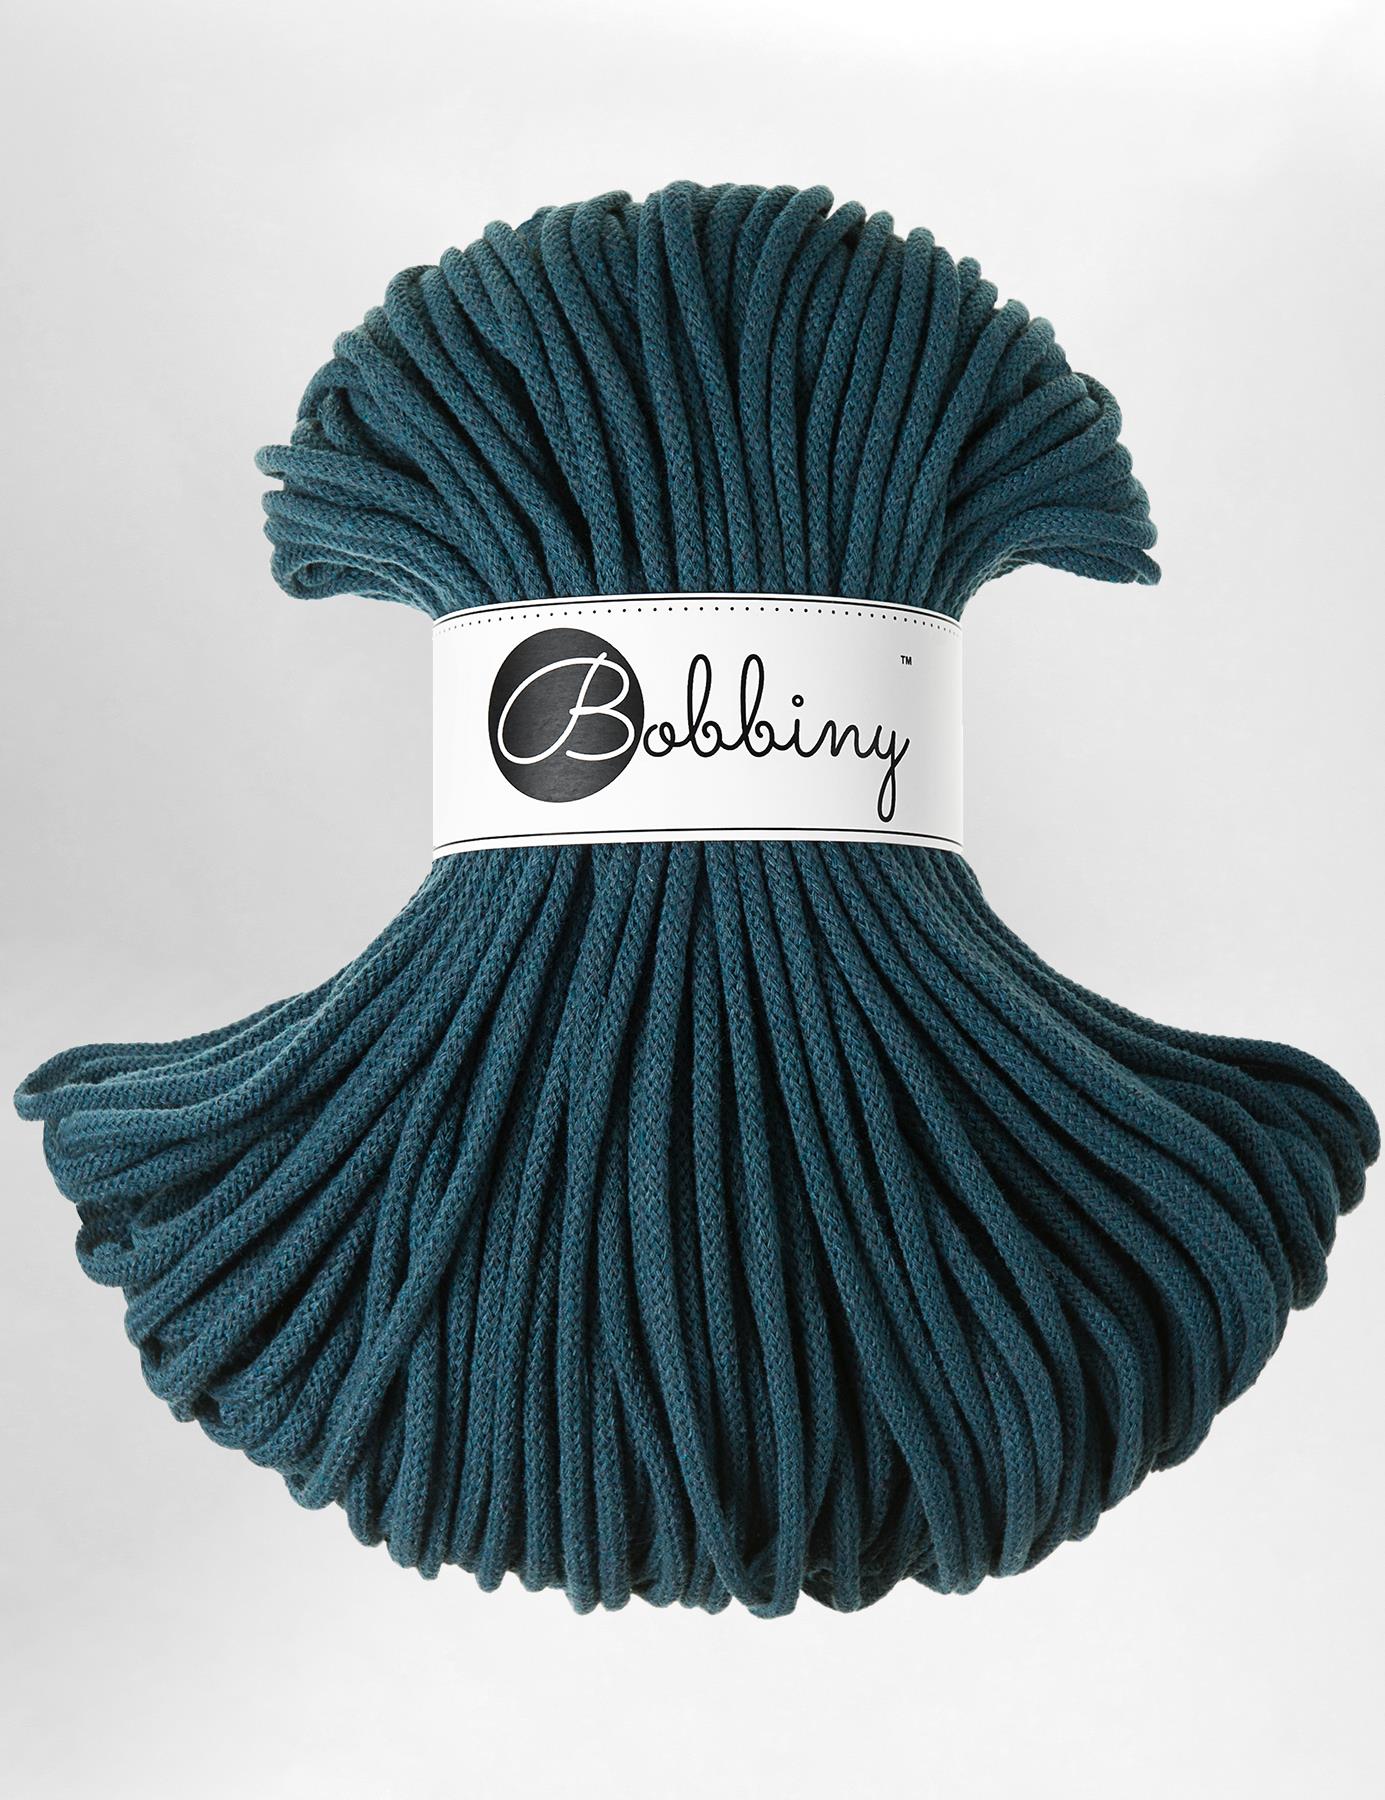 5mm Peacock Blue recycled cotton macrame cord by Bobbiny (100m)